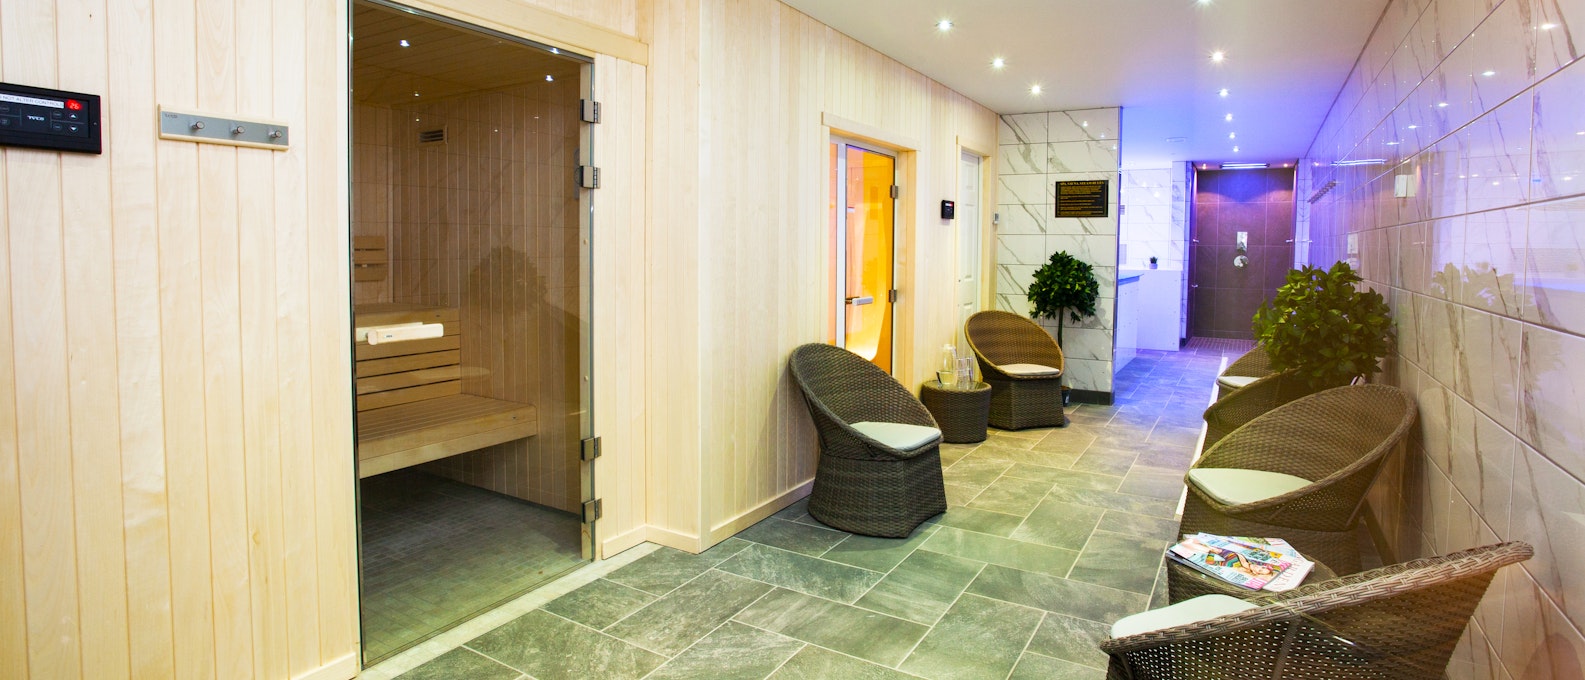 Dorset Spa Therapy at George Albert Hotel Thermal Area Seating